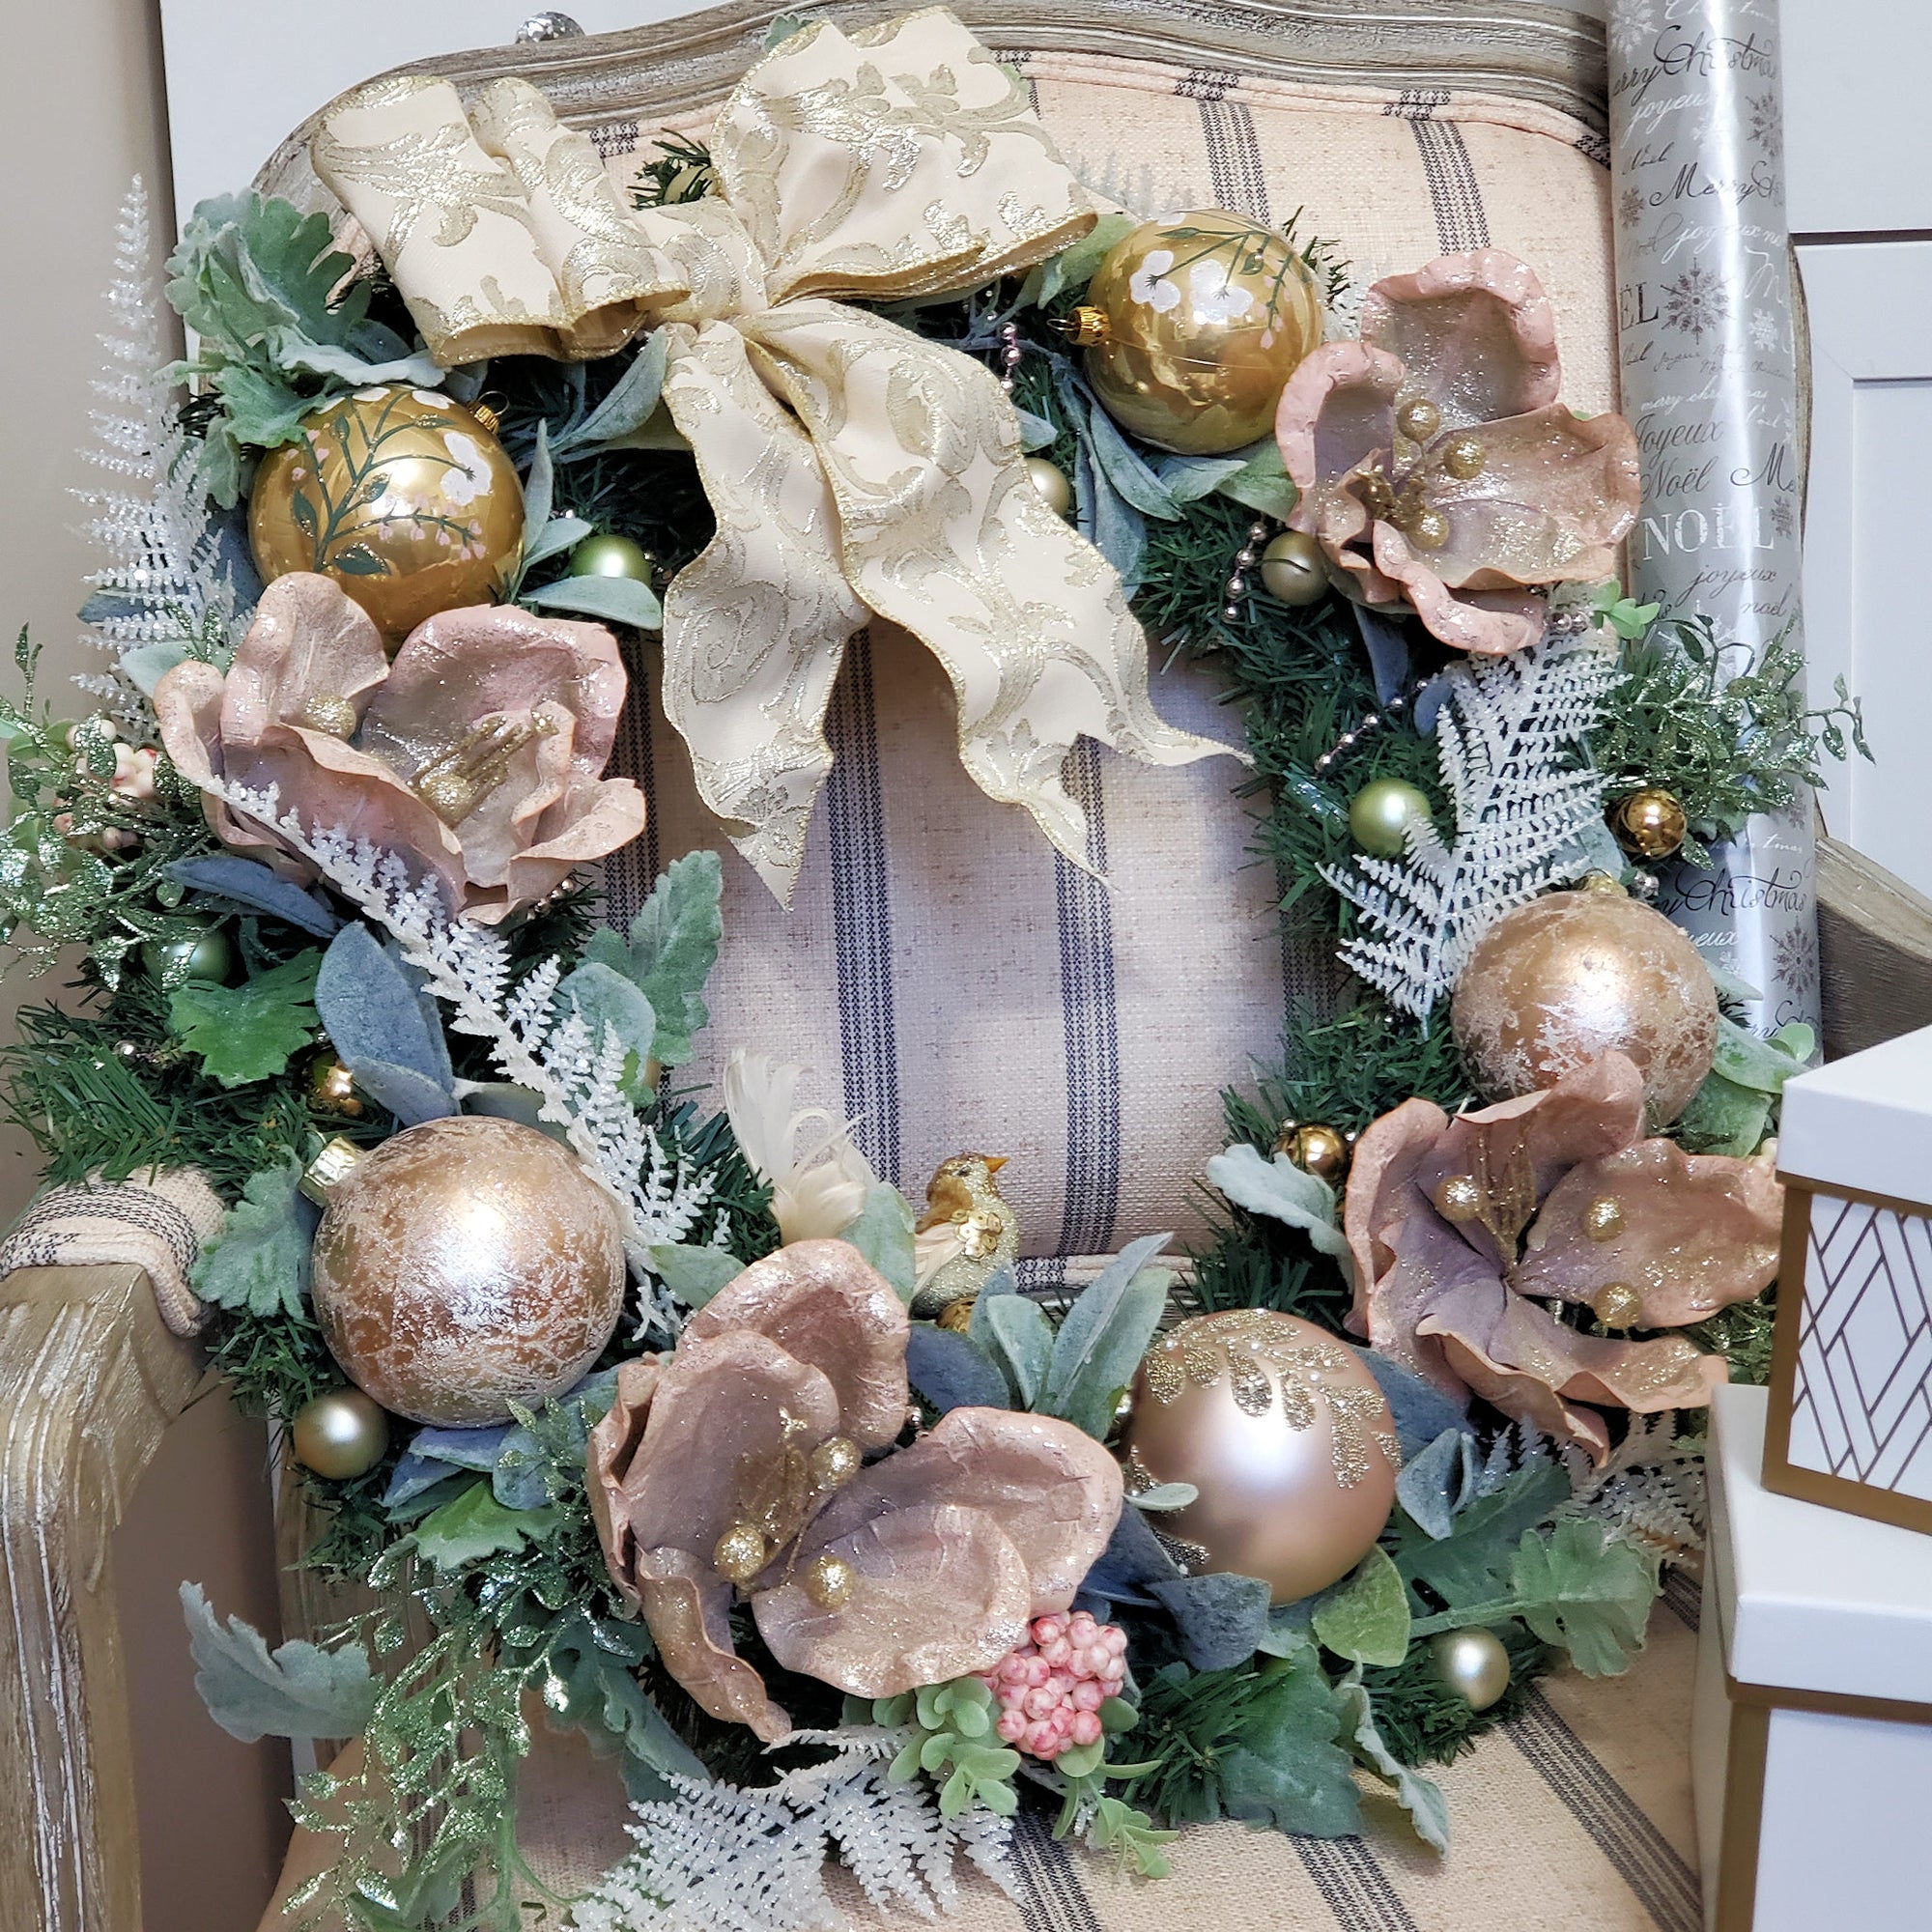 Pink Christmas Wreath with Gold and Pink Ornaments, White Fern Leaves, Lambs Ear, Dusty Miller and Glittering Green Vines